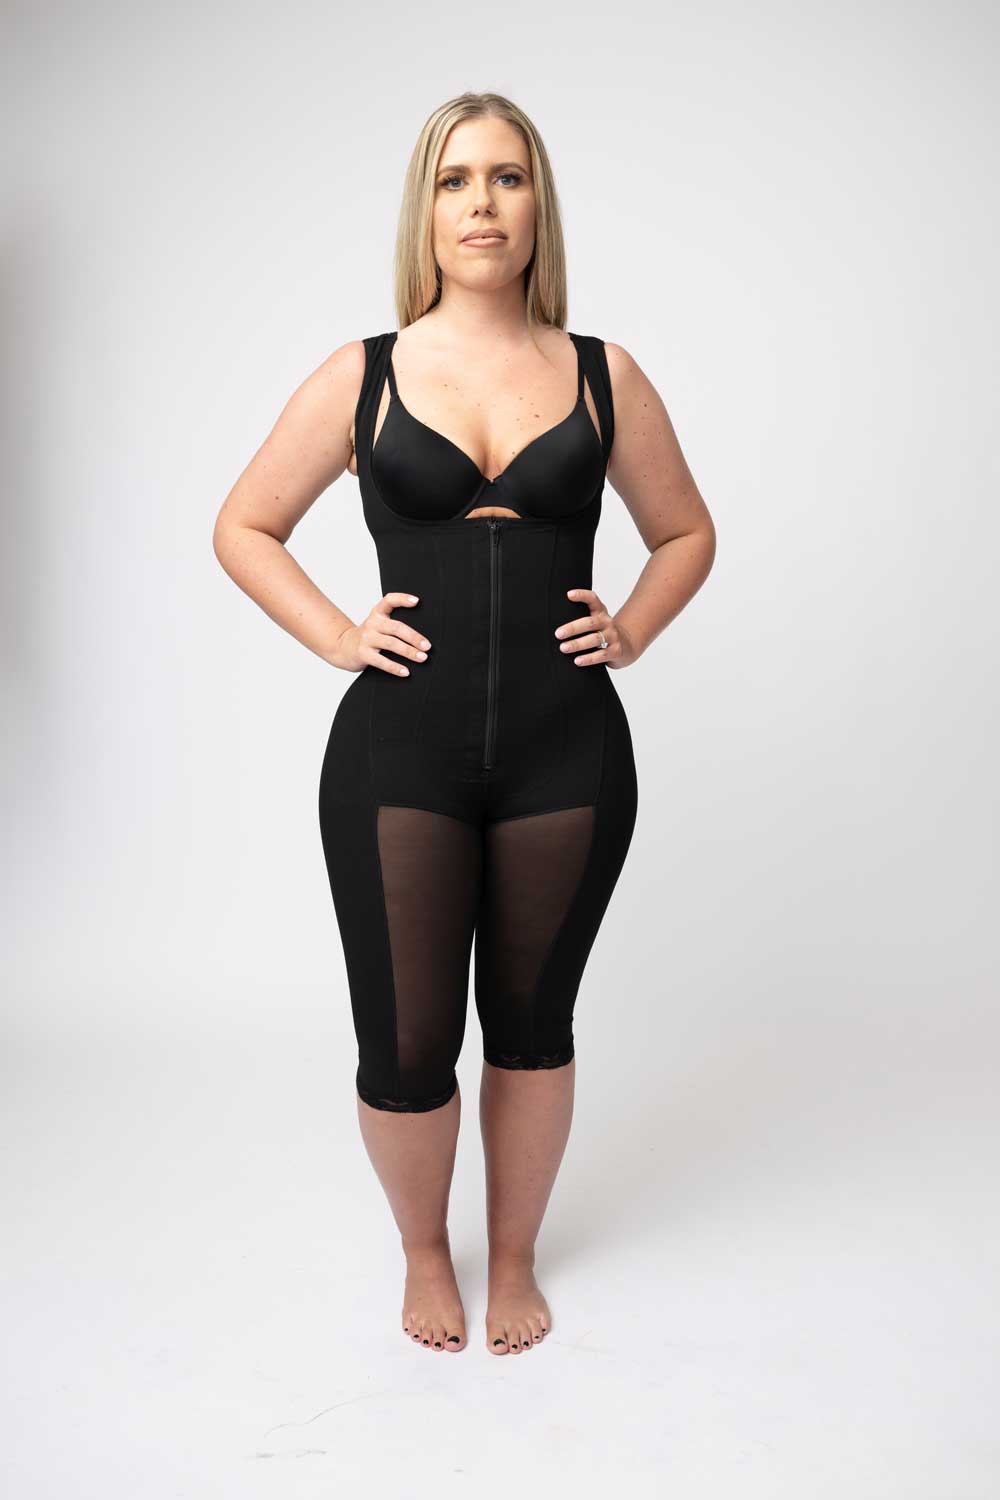 STAGE 2/3- Hourglass 2221-1 Full Coverage Knee Length BBL Faja